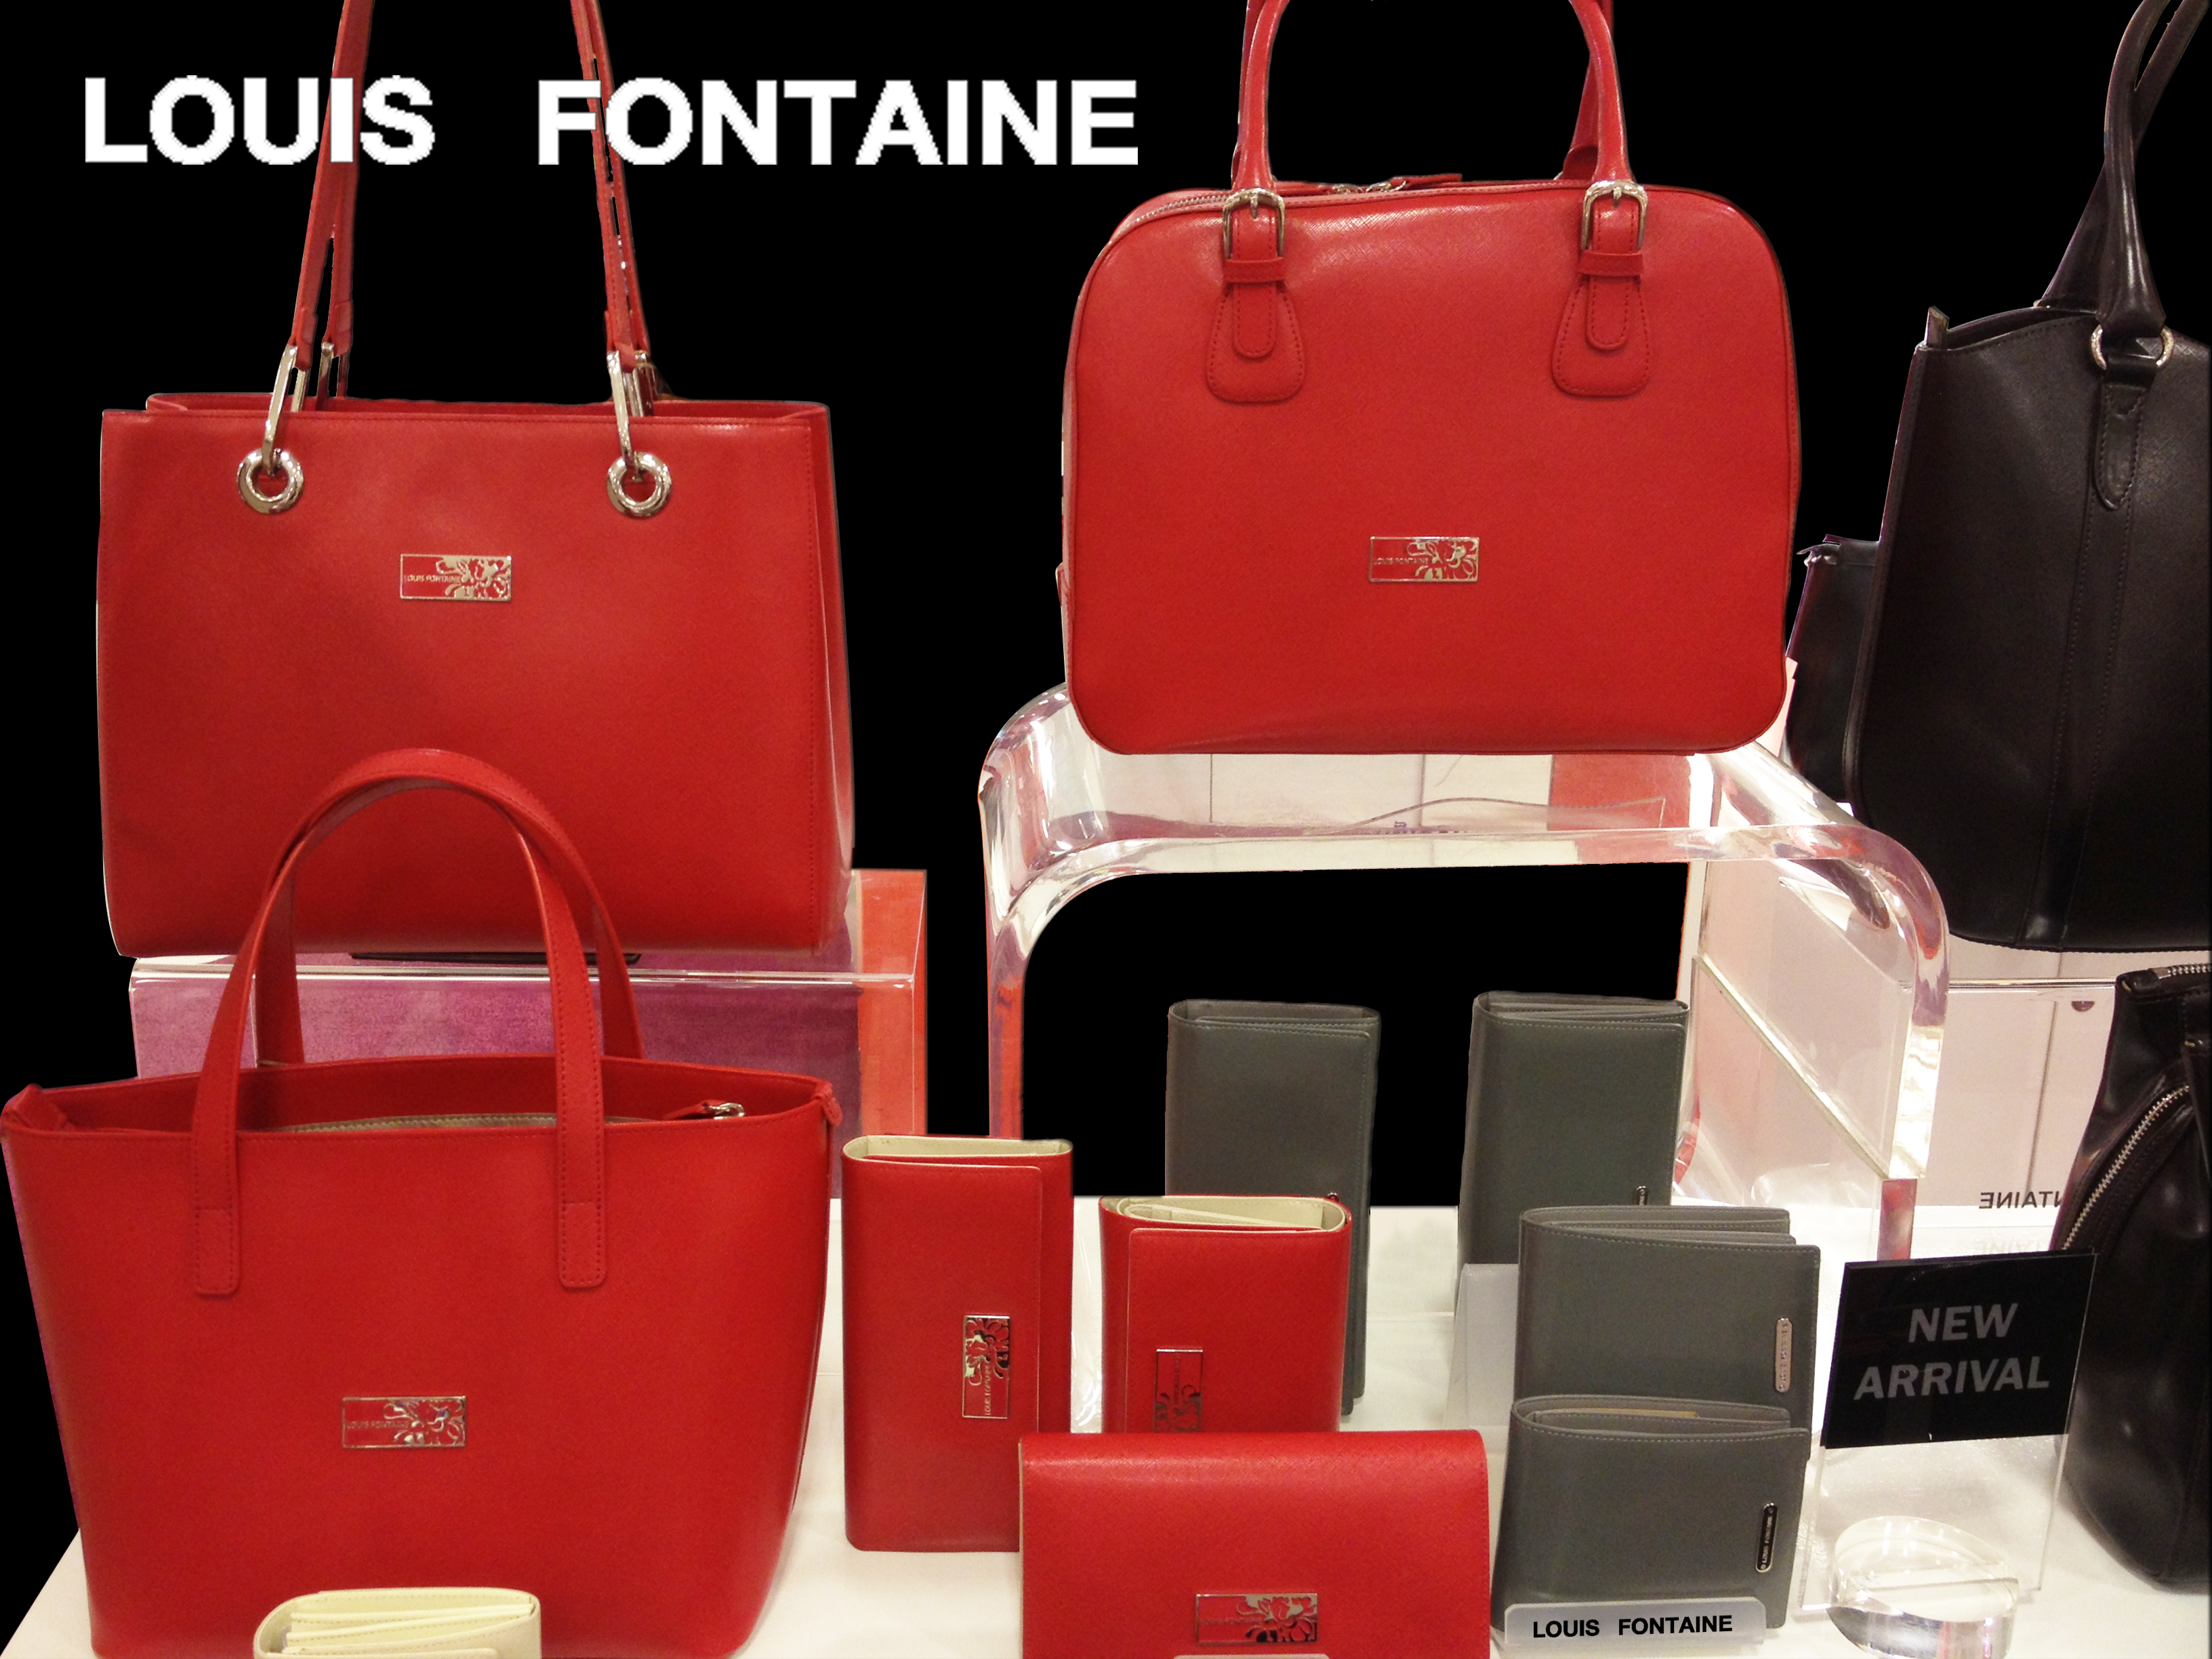 About – Louis Fontaine Leather Goods